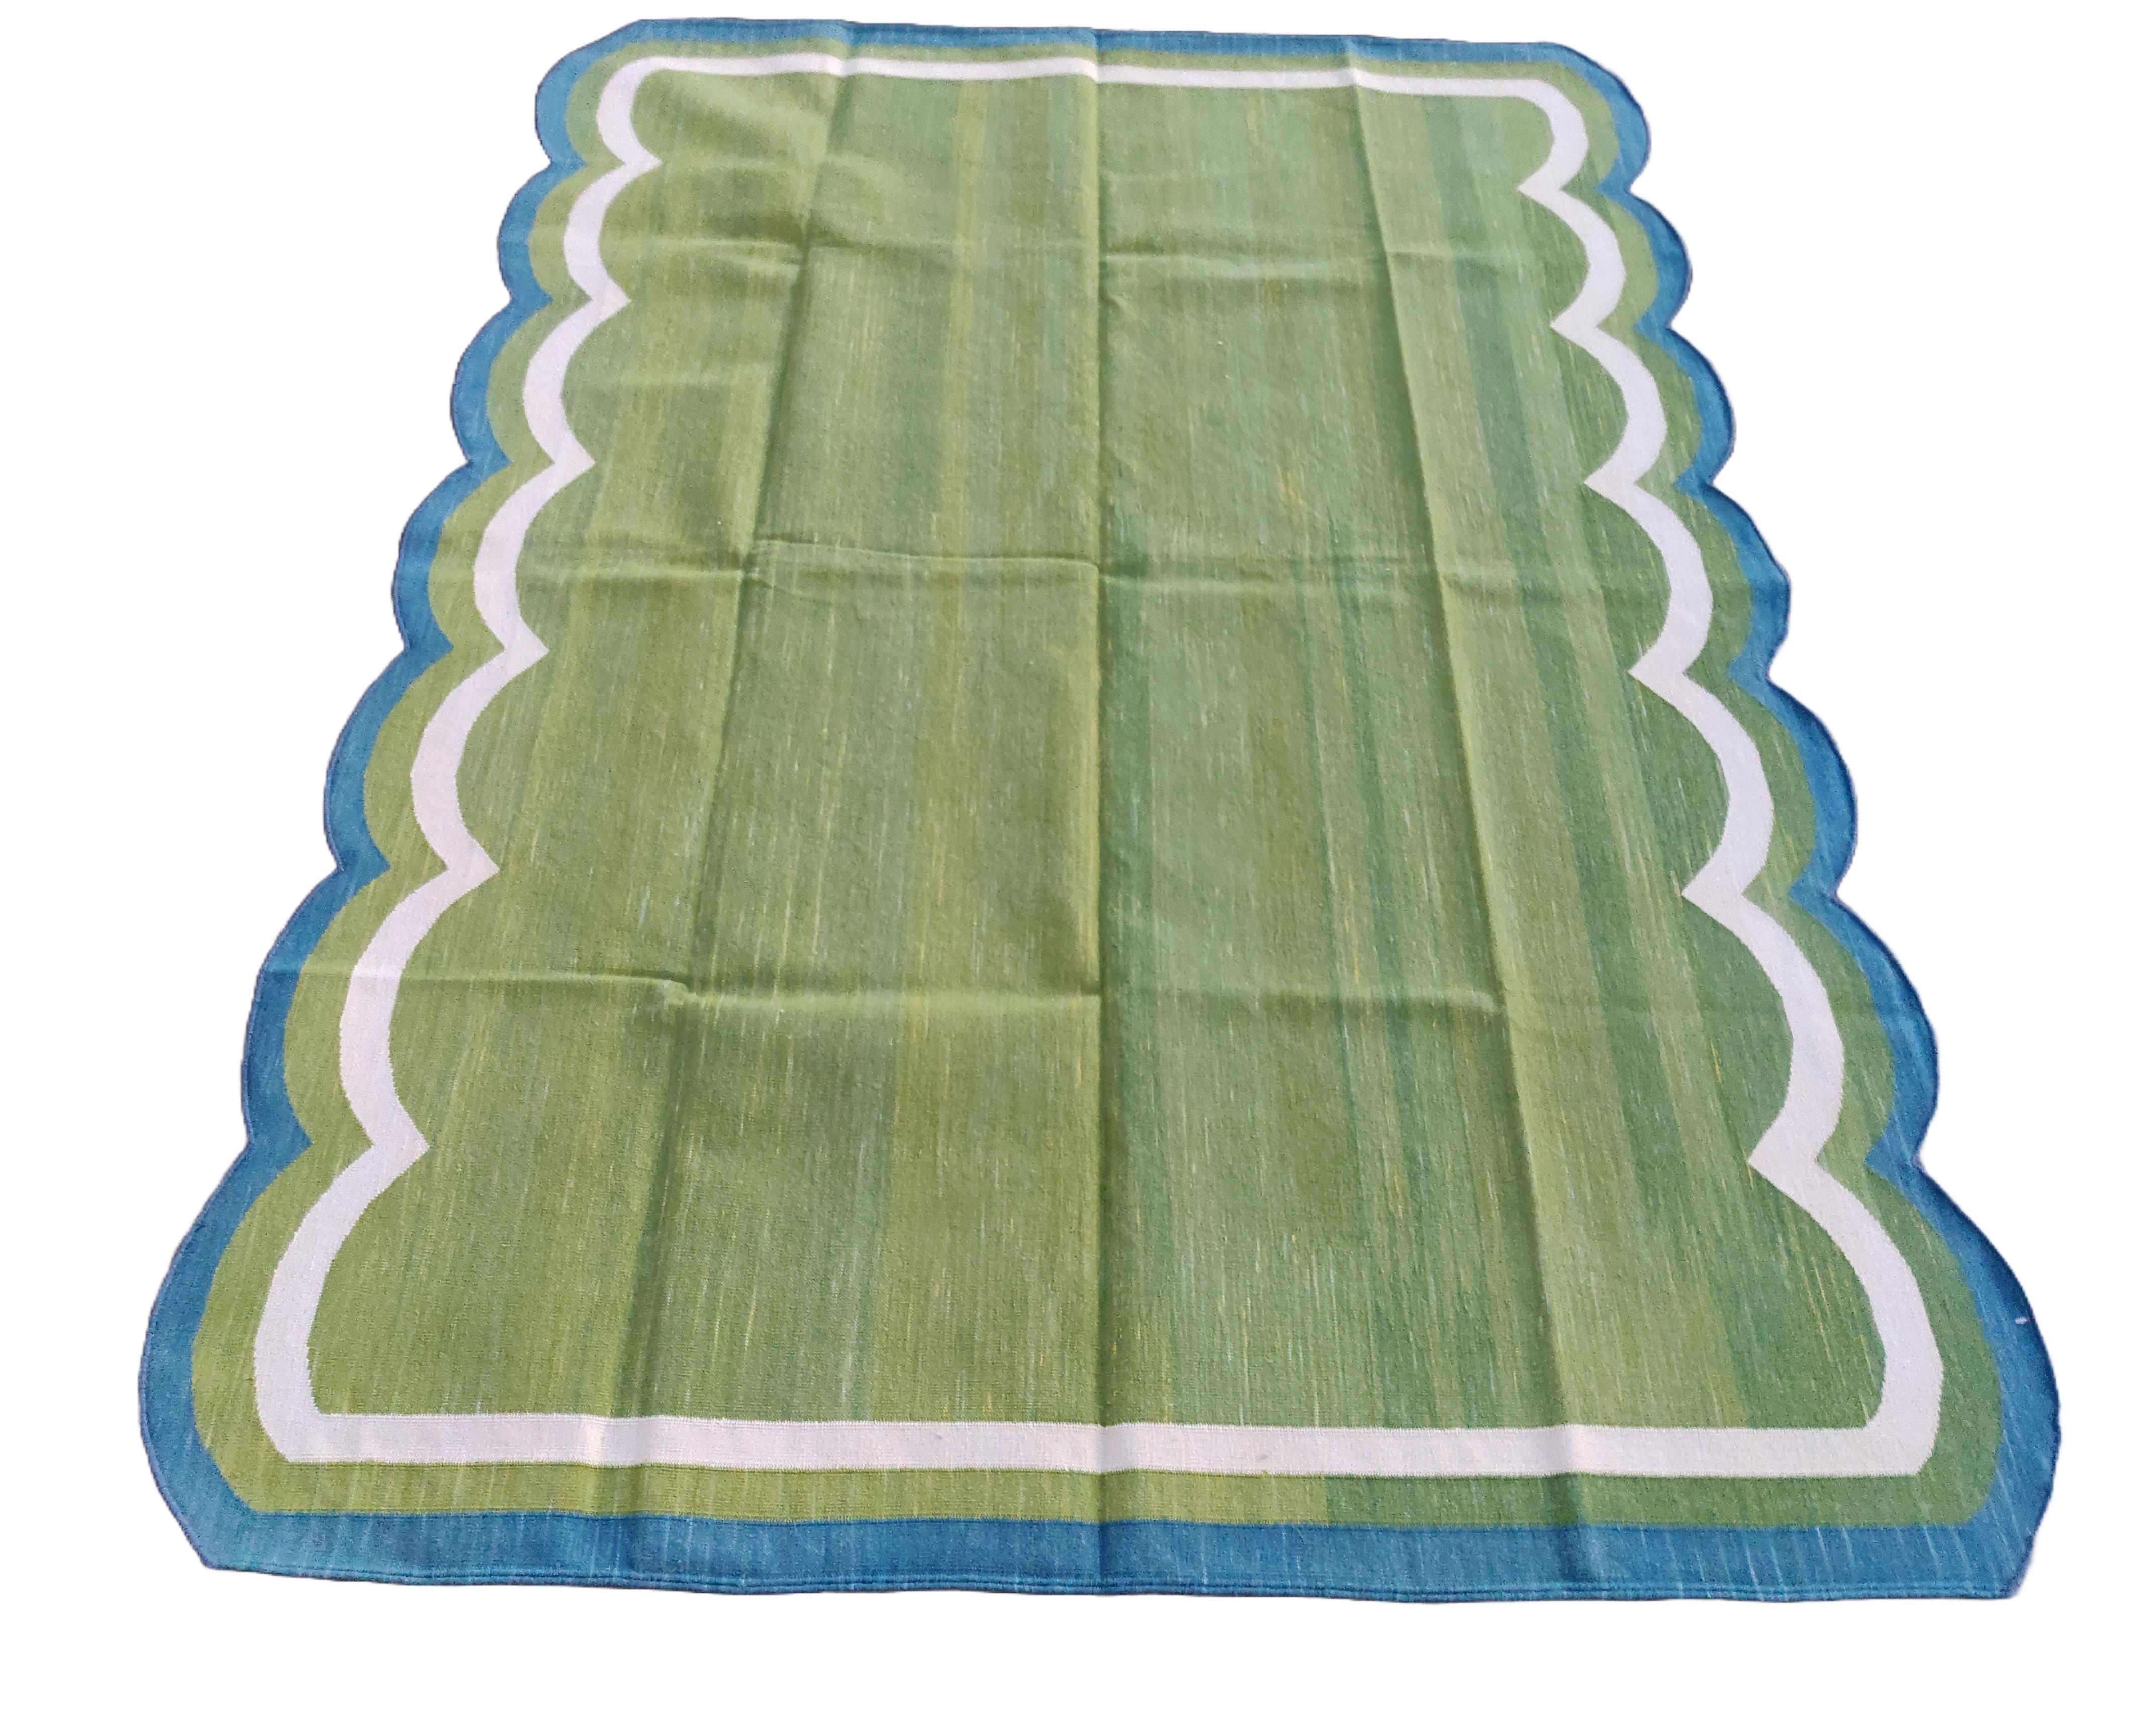 Hand-Woven Handmade Cotton Area Flat Weave Rug, 5x7 Green And Blue Scalloped Indian Dhurrie For Sale